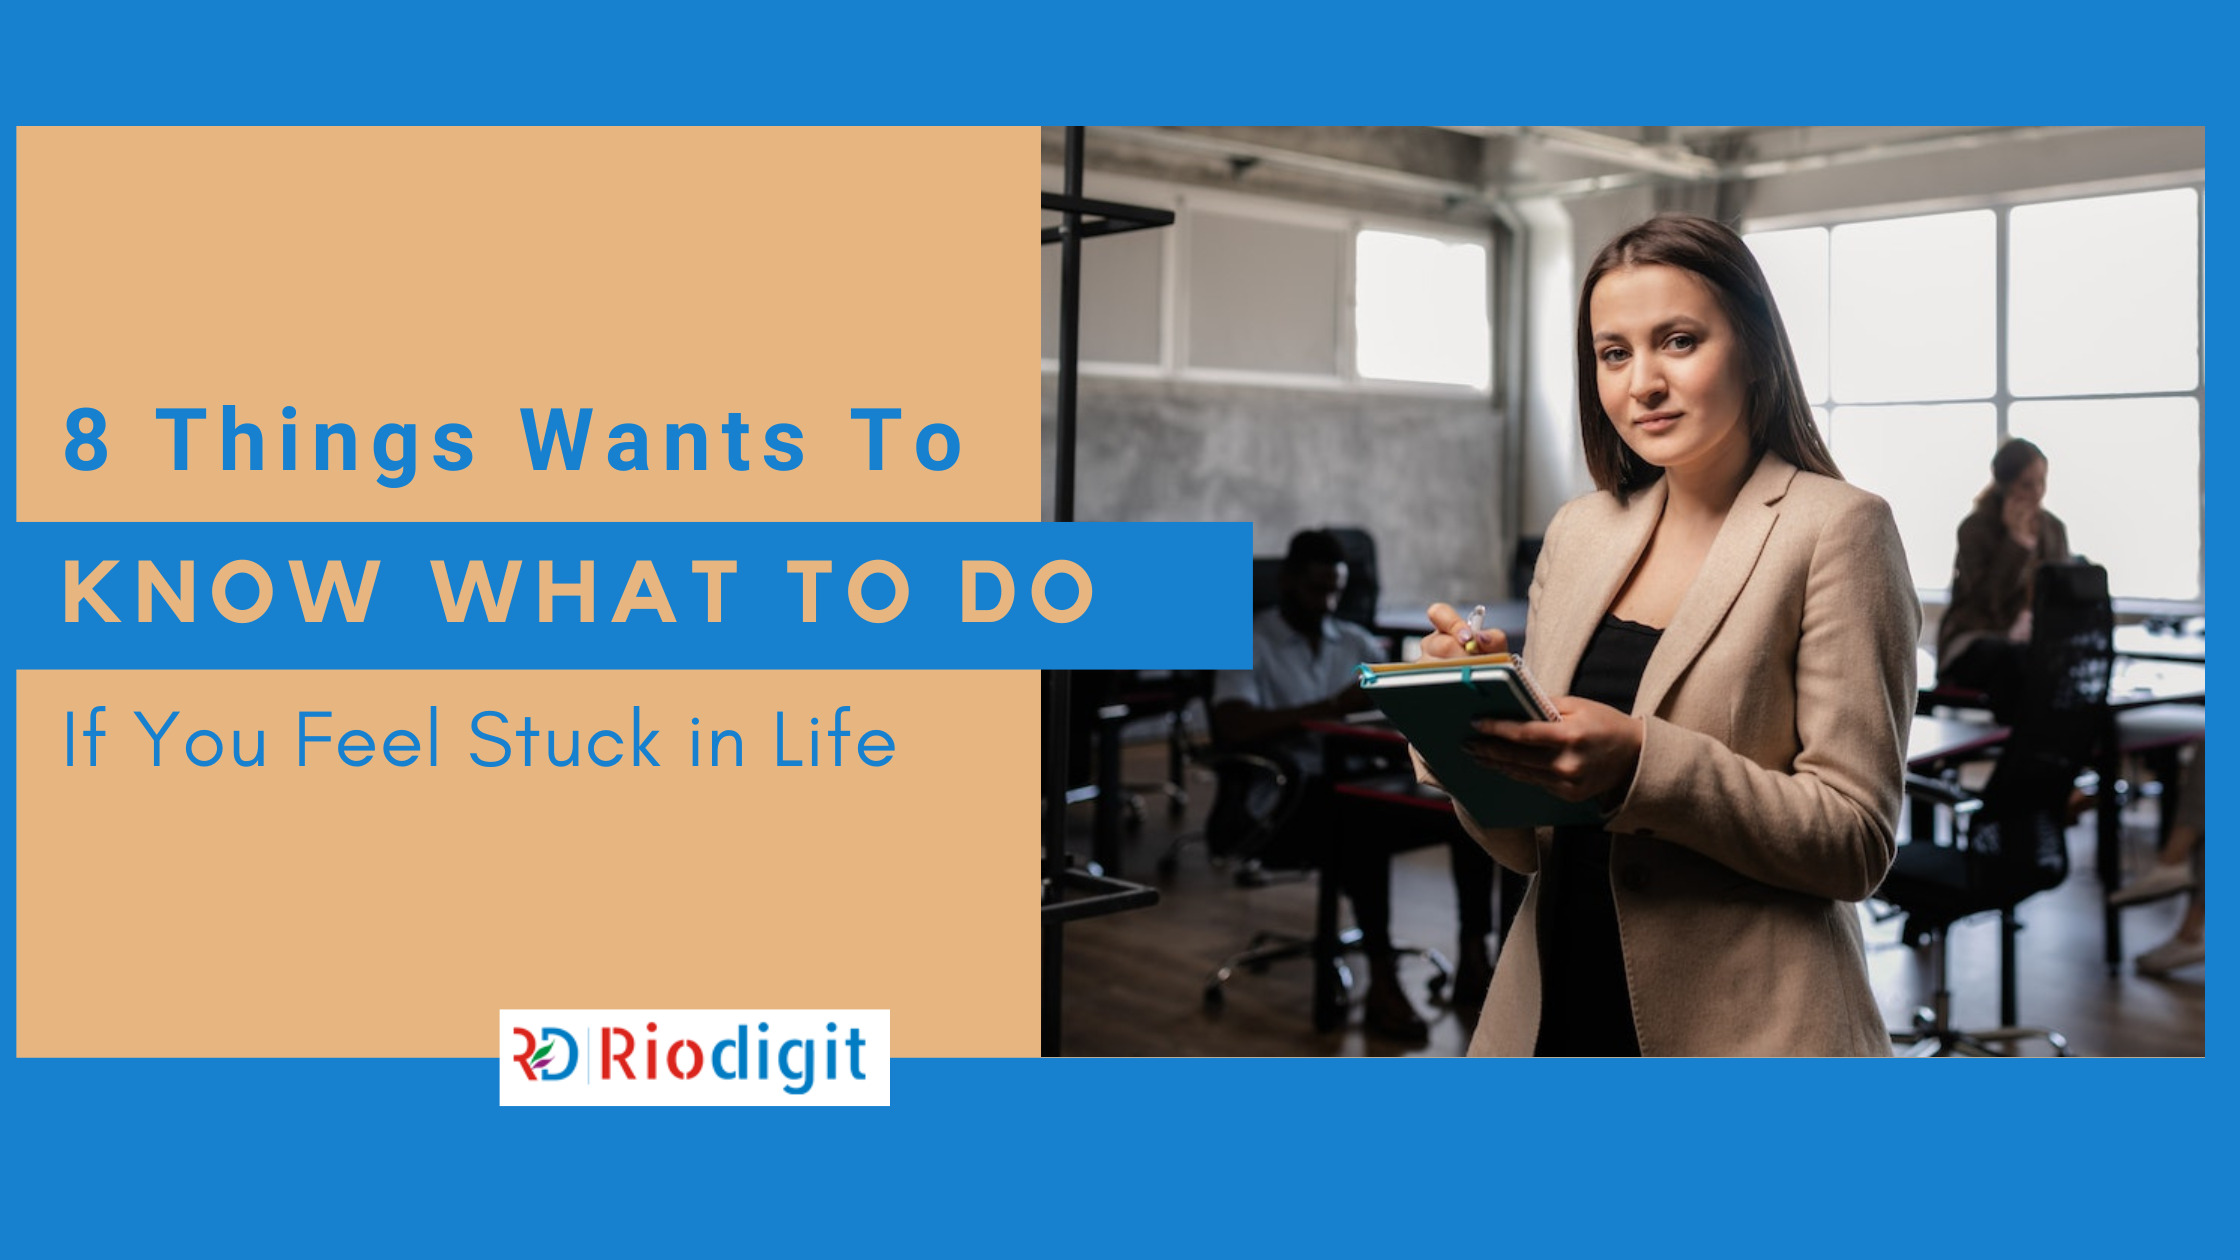 What to Do If You Feel Stuck in Life